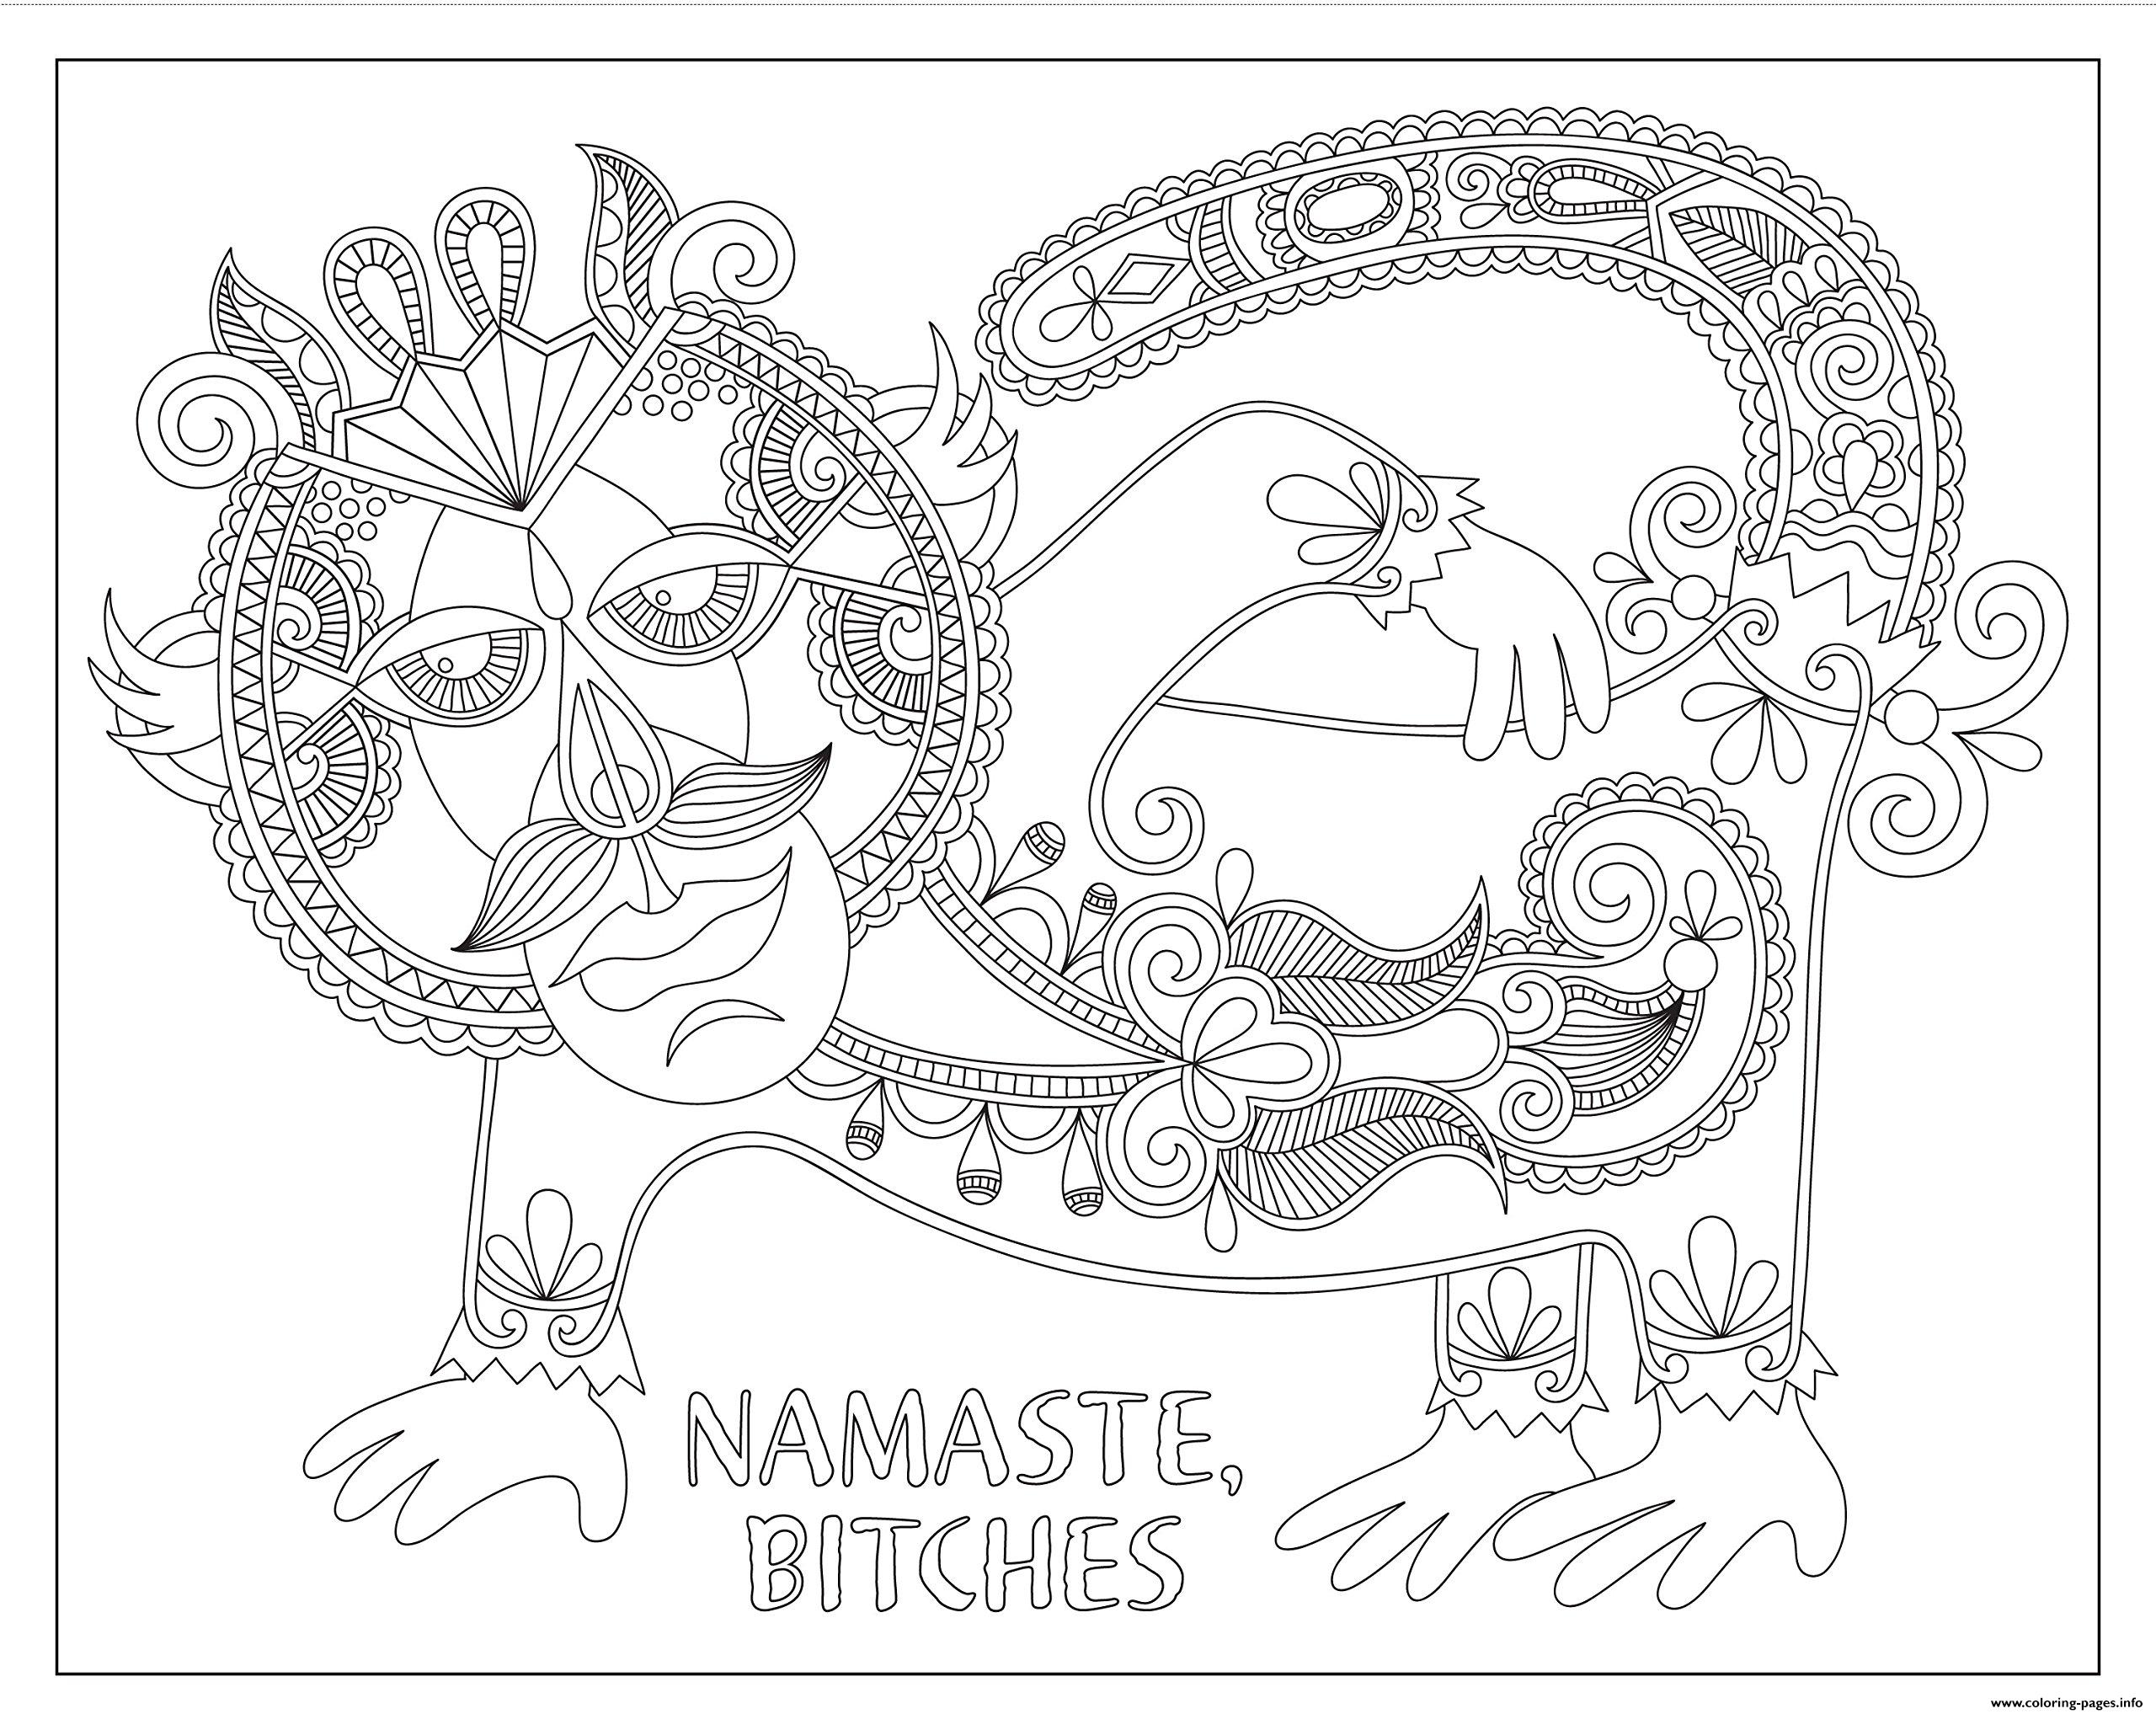 Namaste Bitches Swear Word coloring